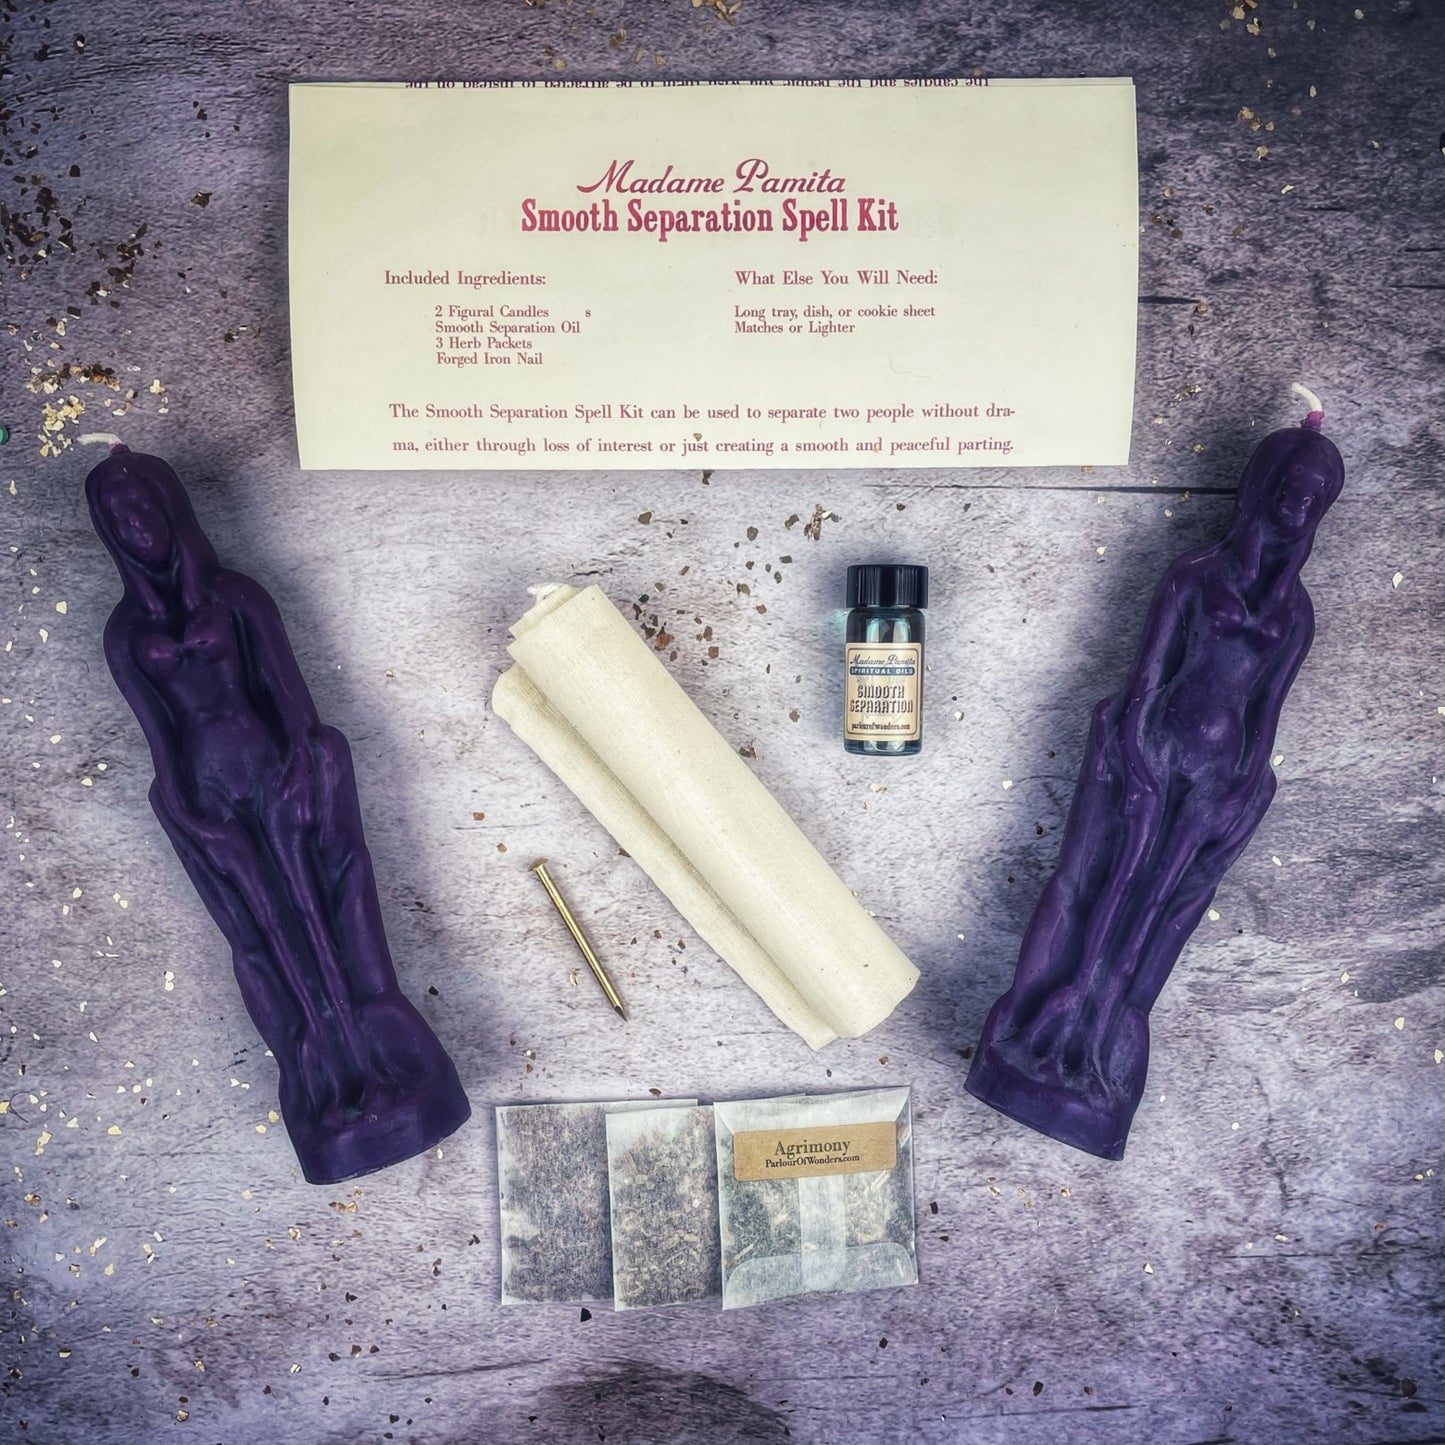 Smooth Separation Candle Spell Kit - Female/Female